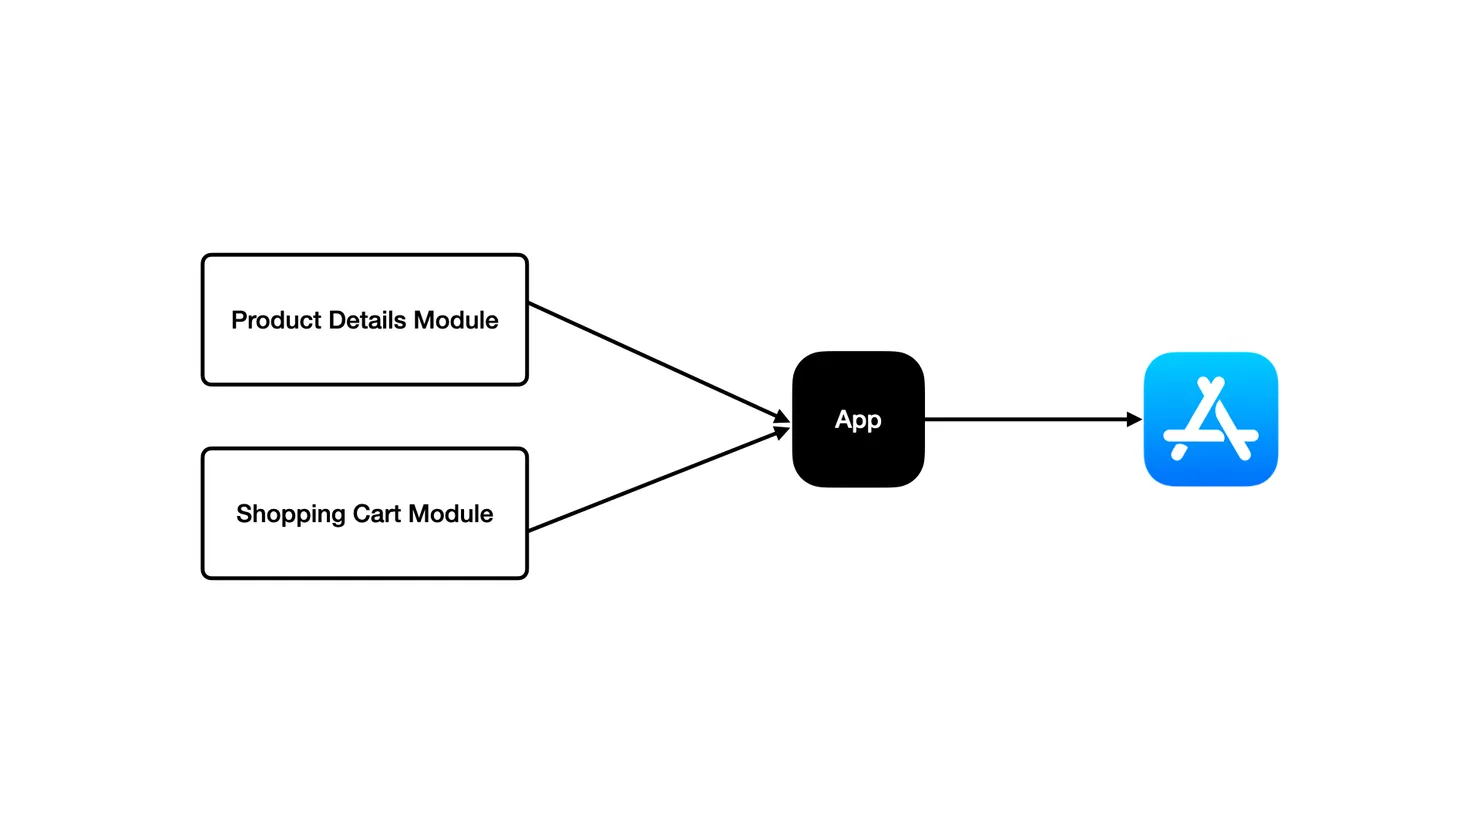 A diagram showing 2 modules being bundled into a single app and then deployed to the app store